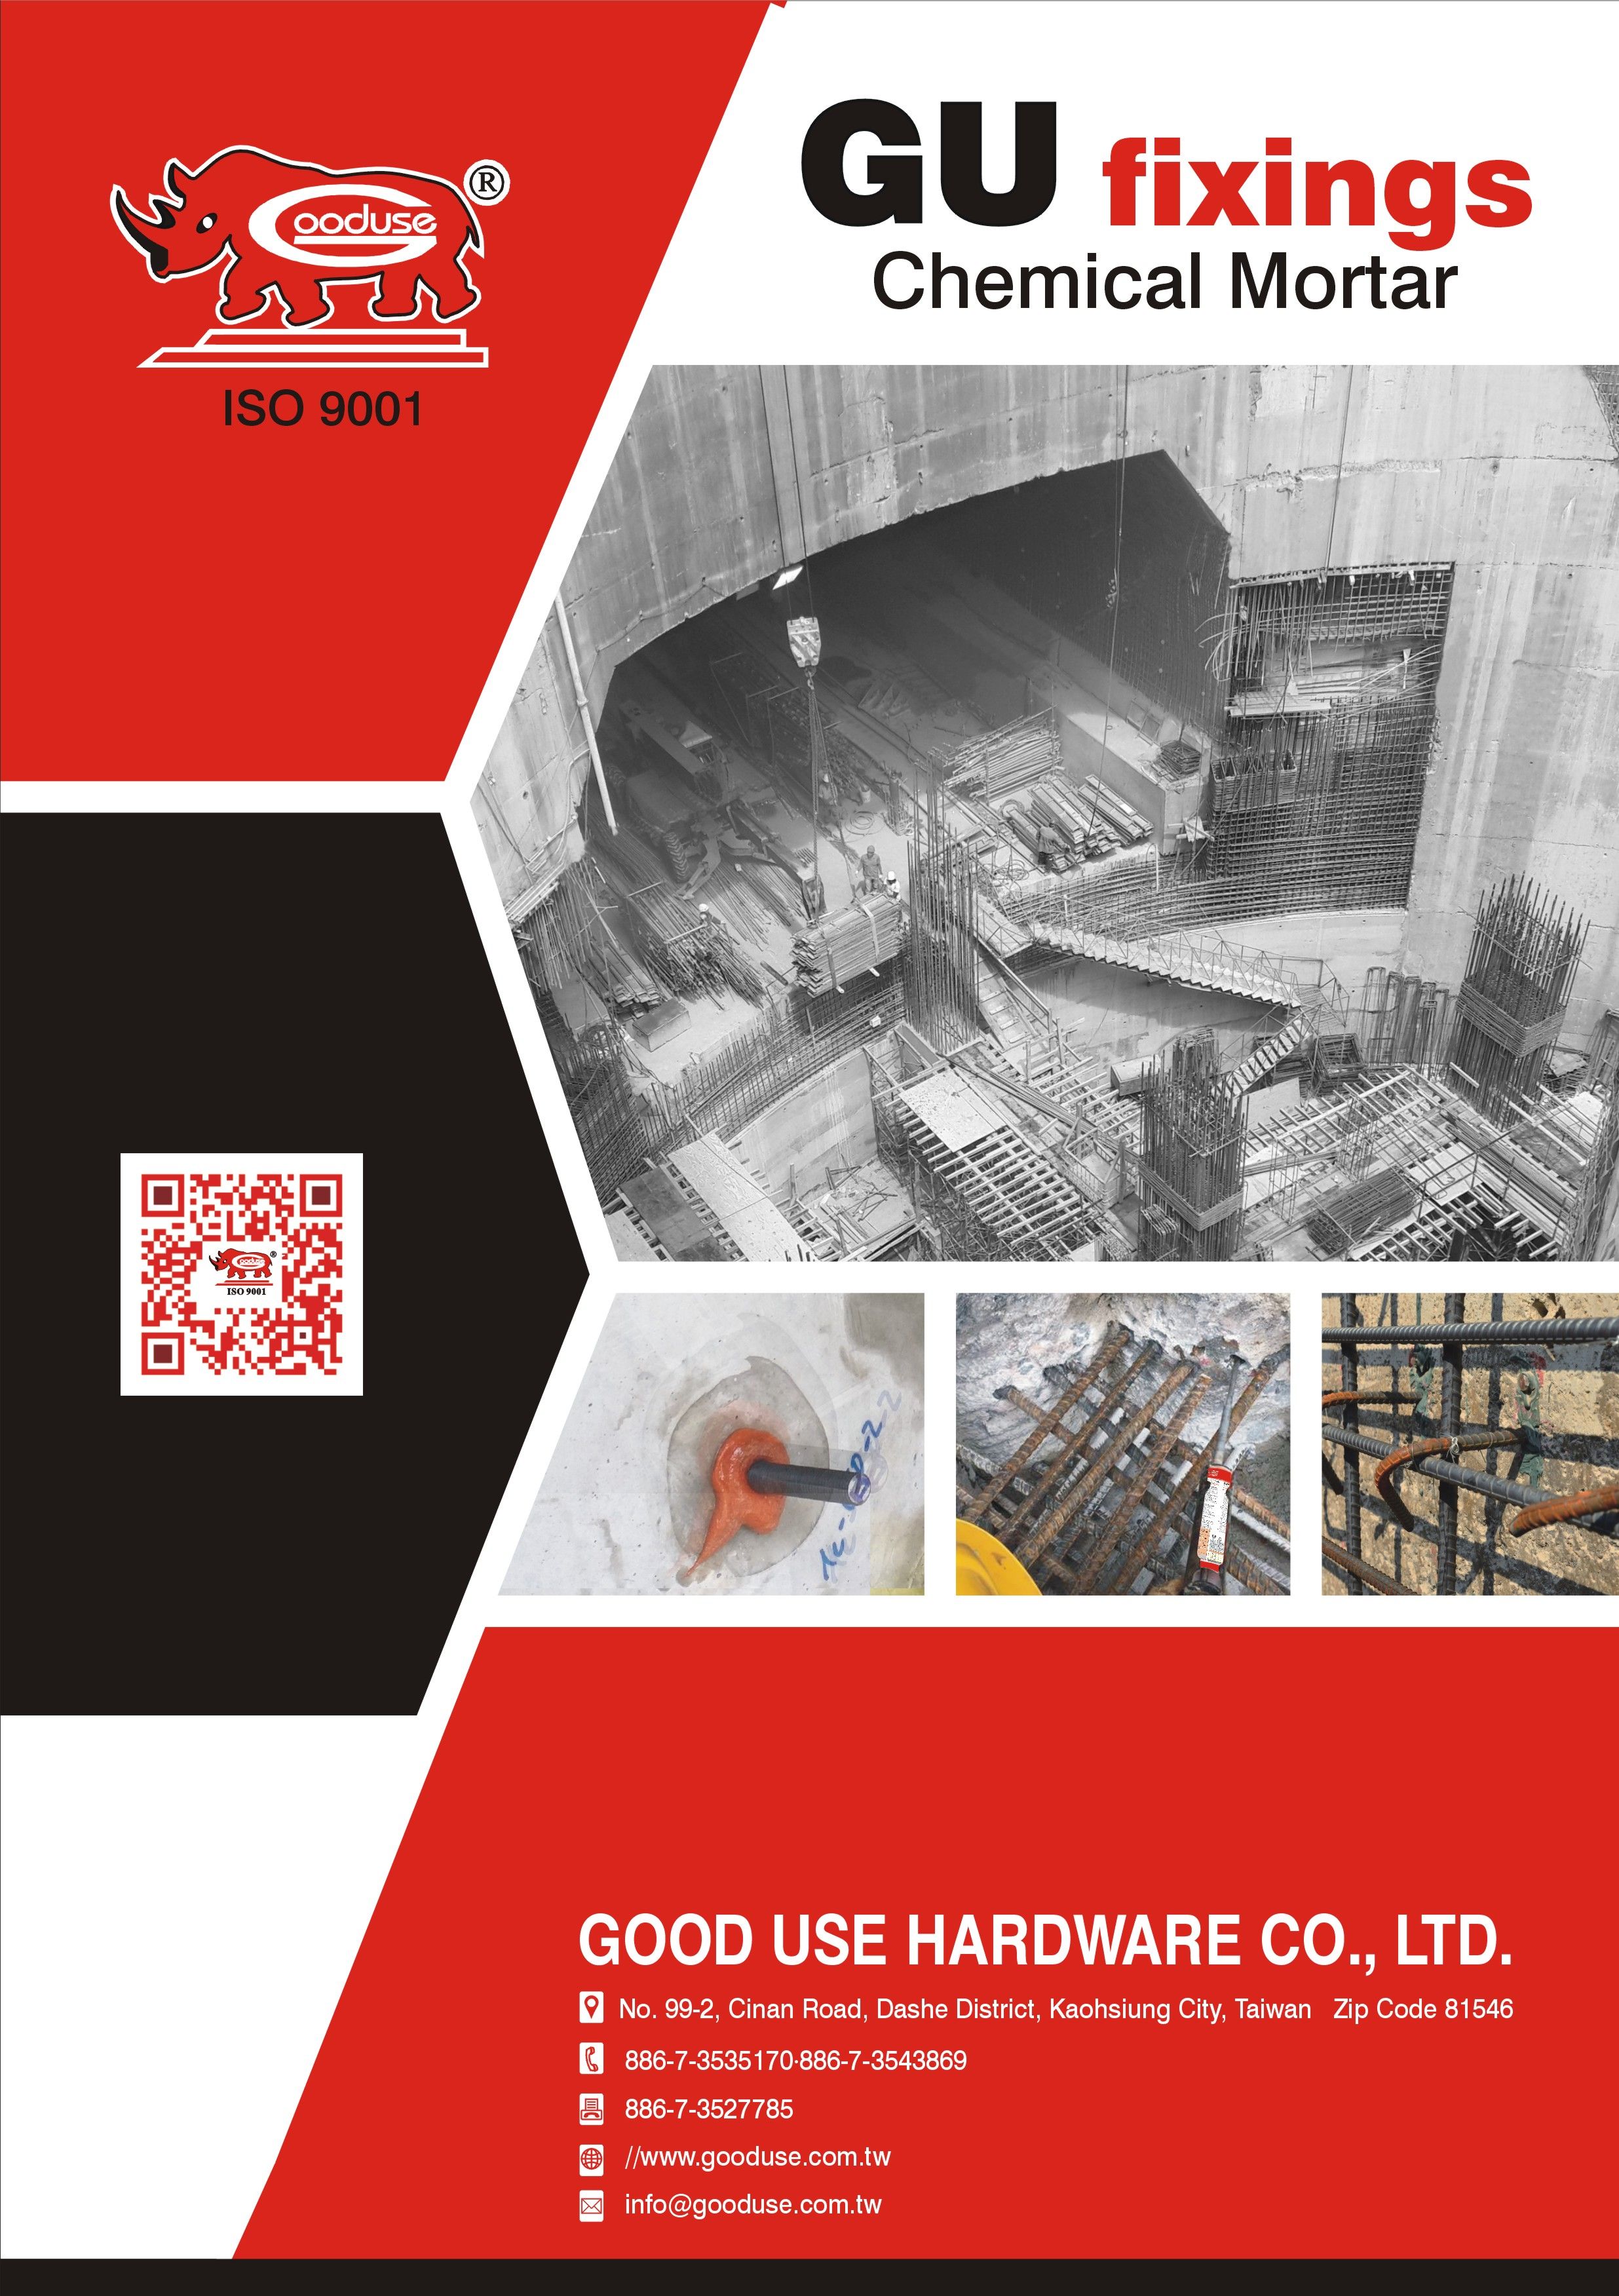 GOOD USE HARDWARE CO., LTD. _Online Catalogues